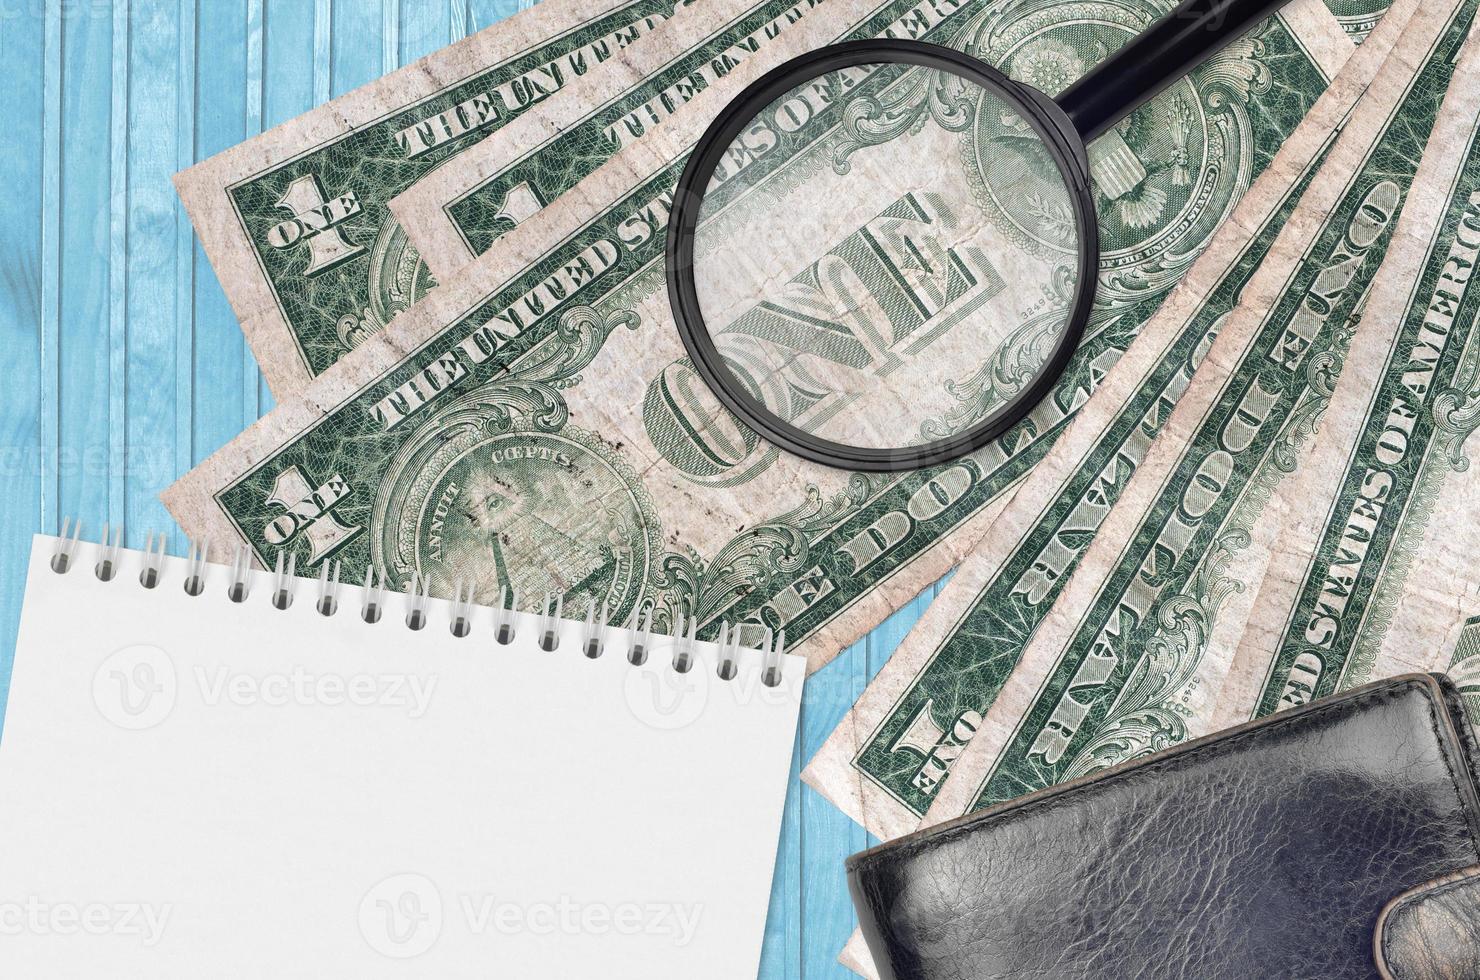 1 US dollar bills and magnifying glass with black purse and notepad. Concept of counterfeit money. Search for differences in details on money bills to detect fake photo